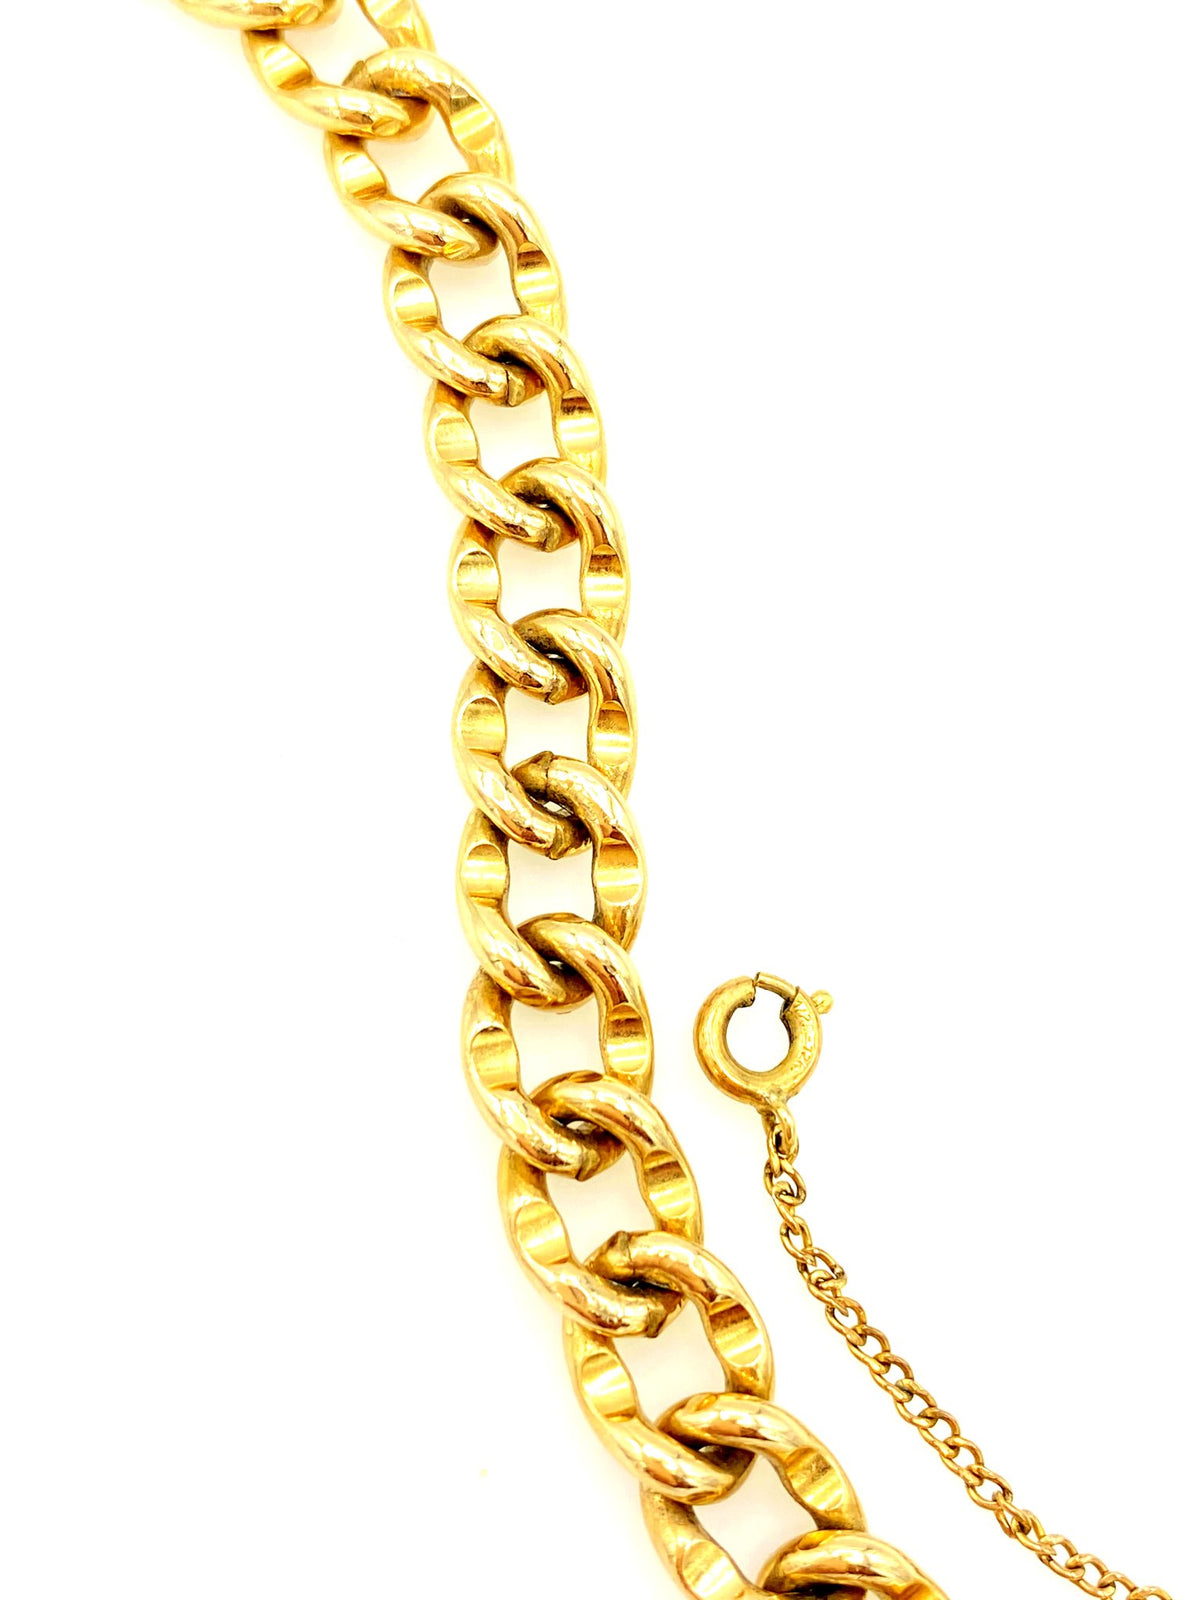 12K Gold Filled Curb Chain Link Layering Bracelet - 24 Wishes Vintage Jewelry